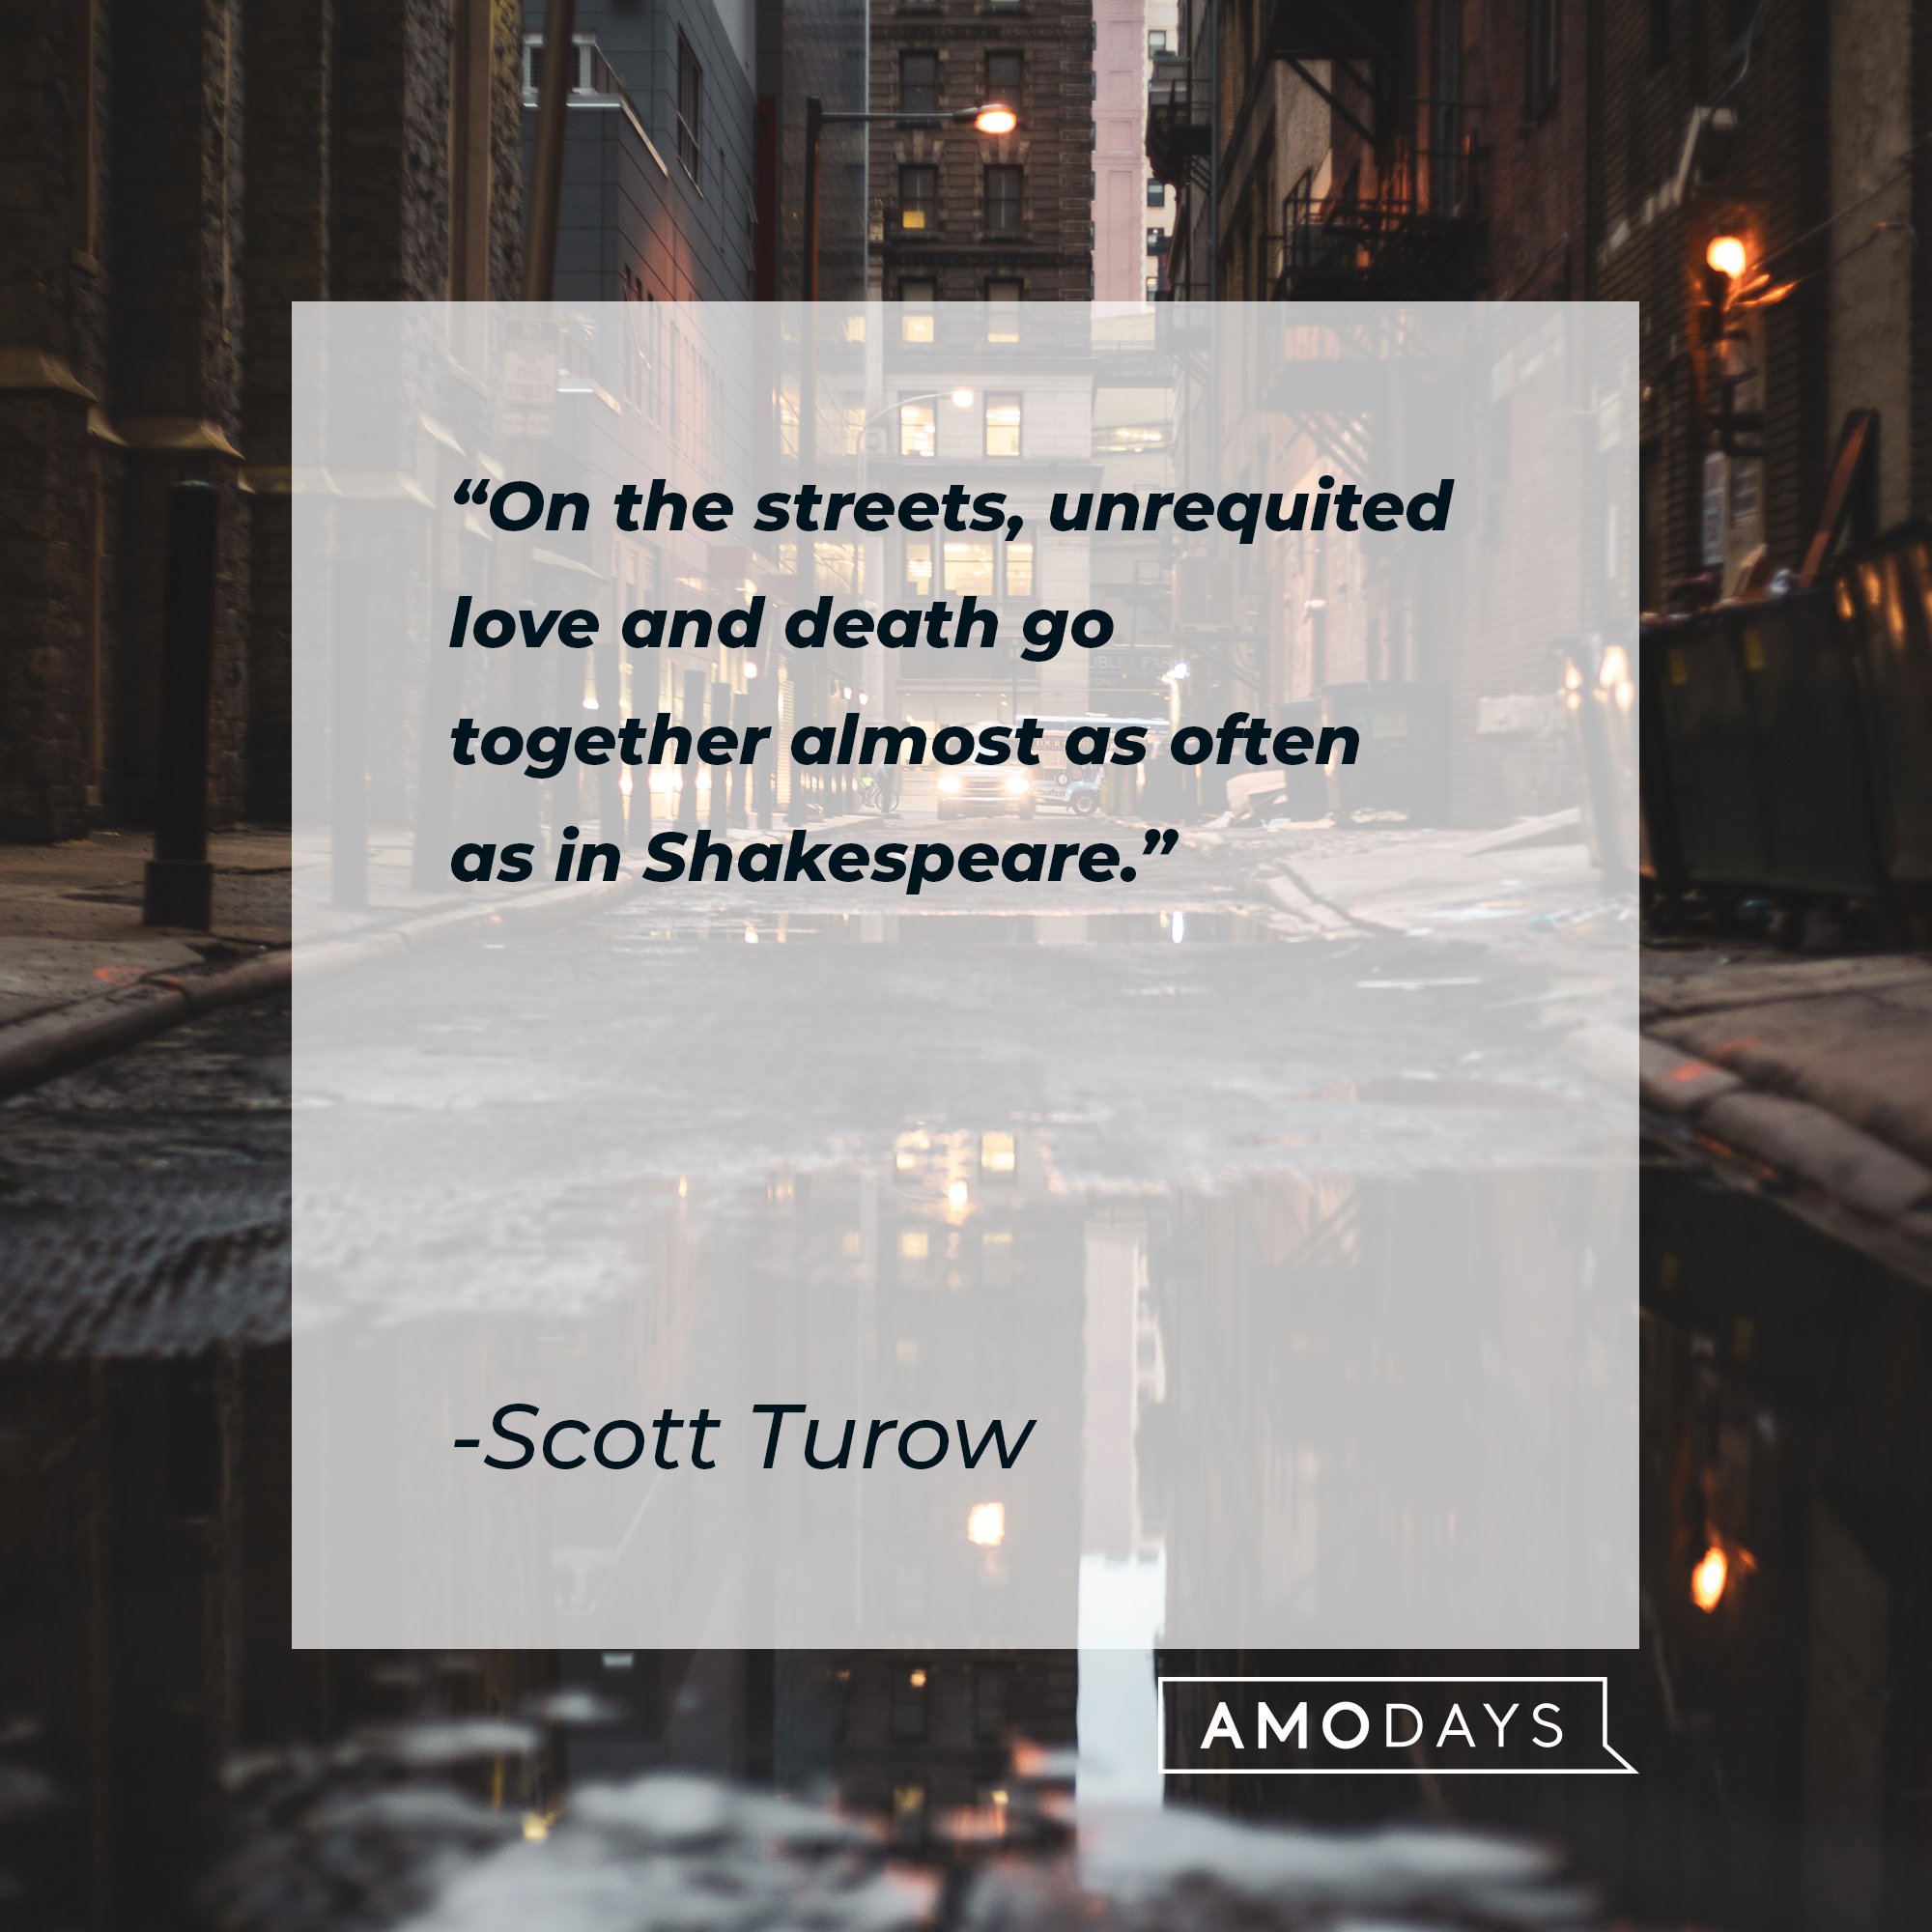 Scott Turow’s quote: "On the streets, unrequited love and death go together almost as often as in Shakespeare." | Image: AmoDays